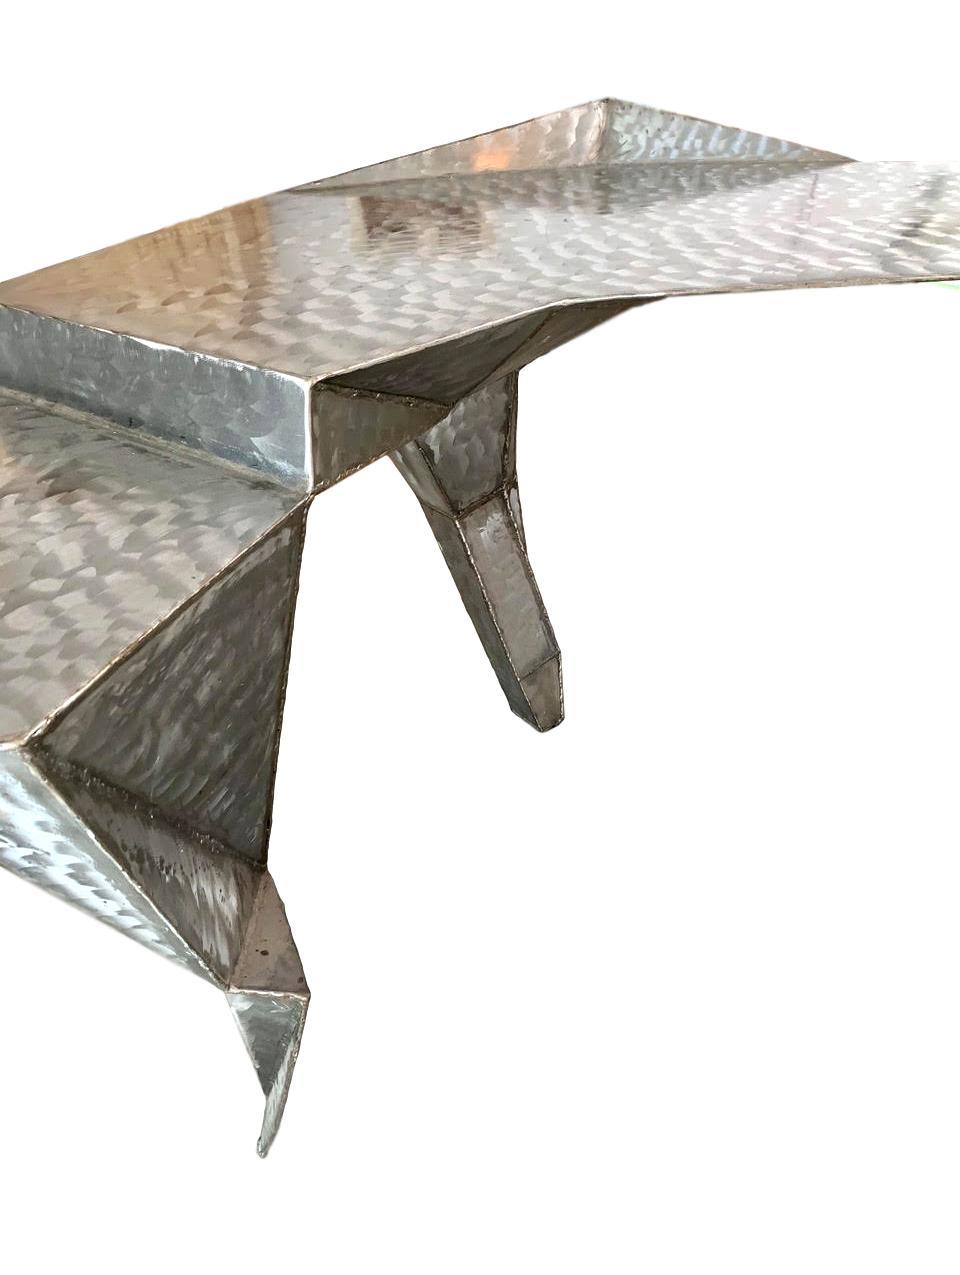 Late 20th Century Sculptural Steel Desk by Bruce Gray